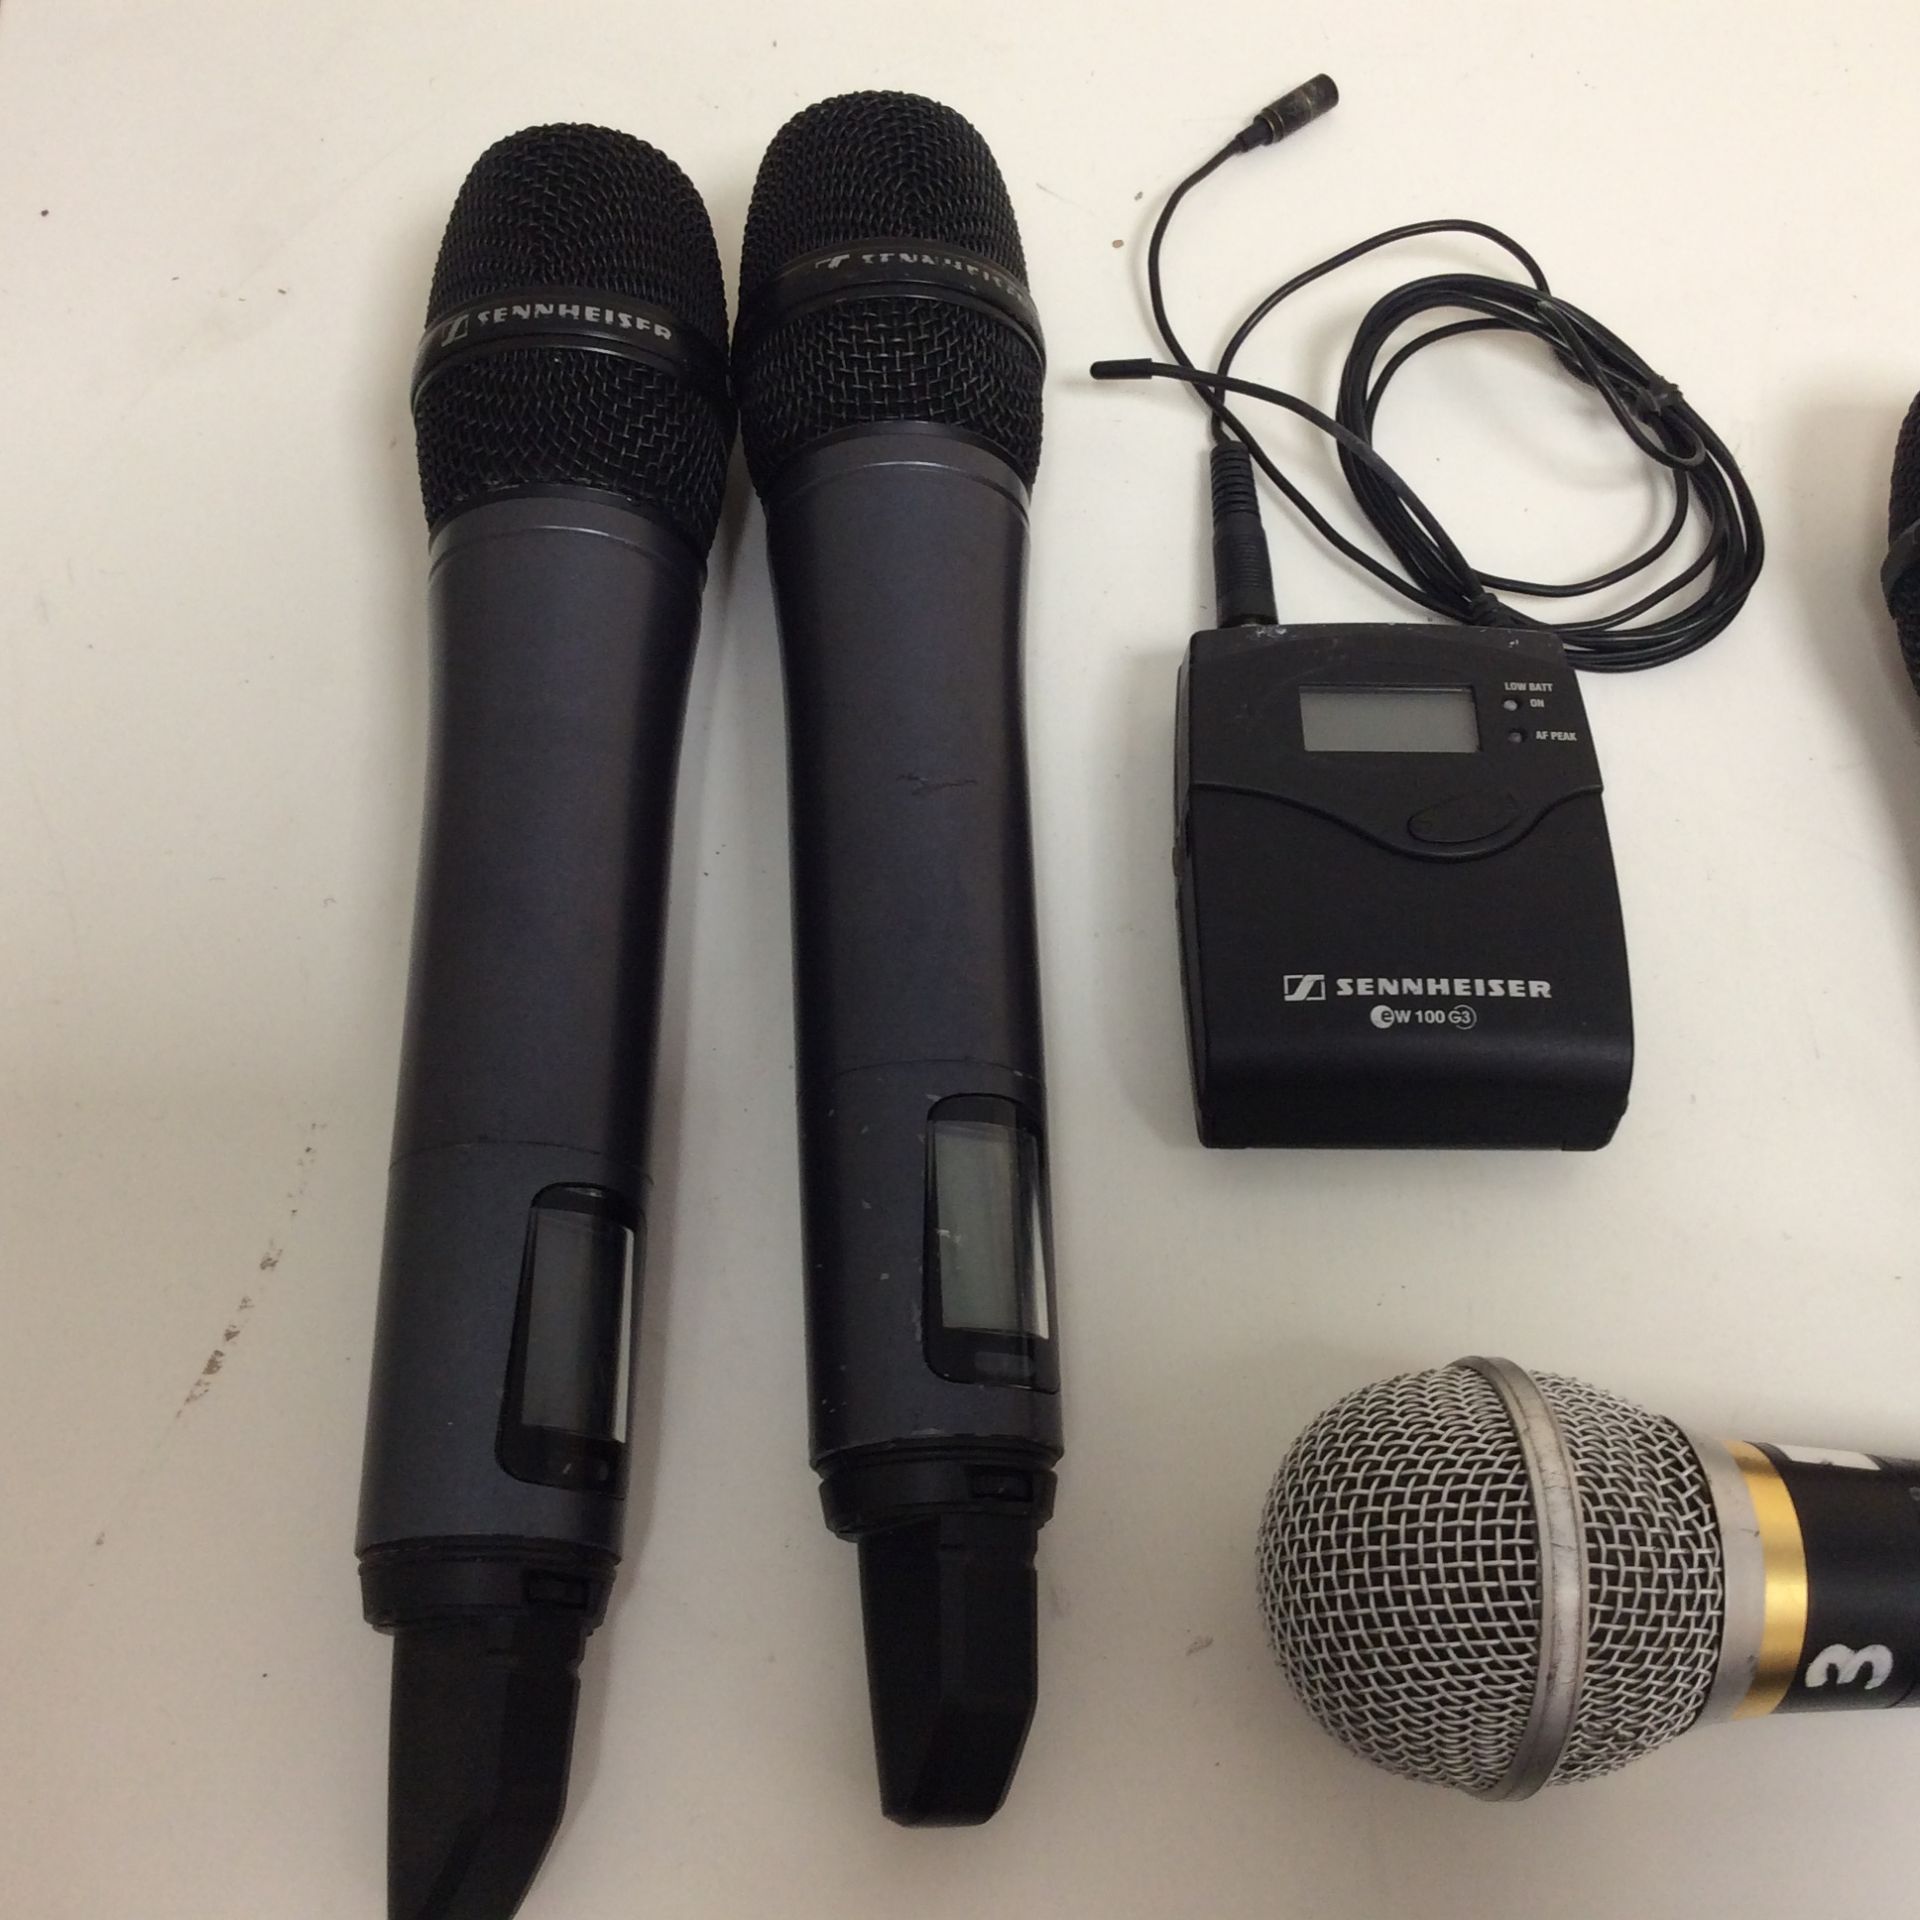 Joblot of microphones to include mipro and sennheiser - Image 3 of 4